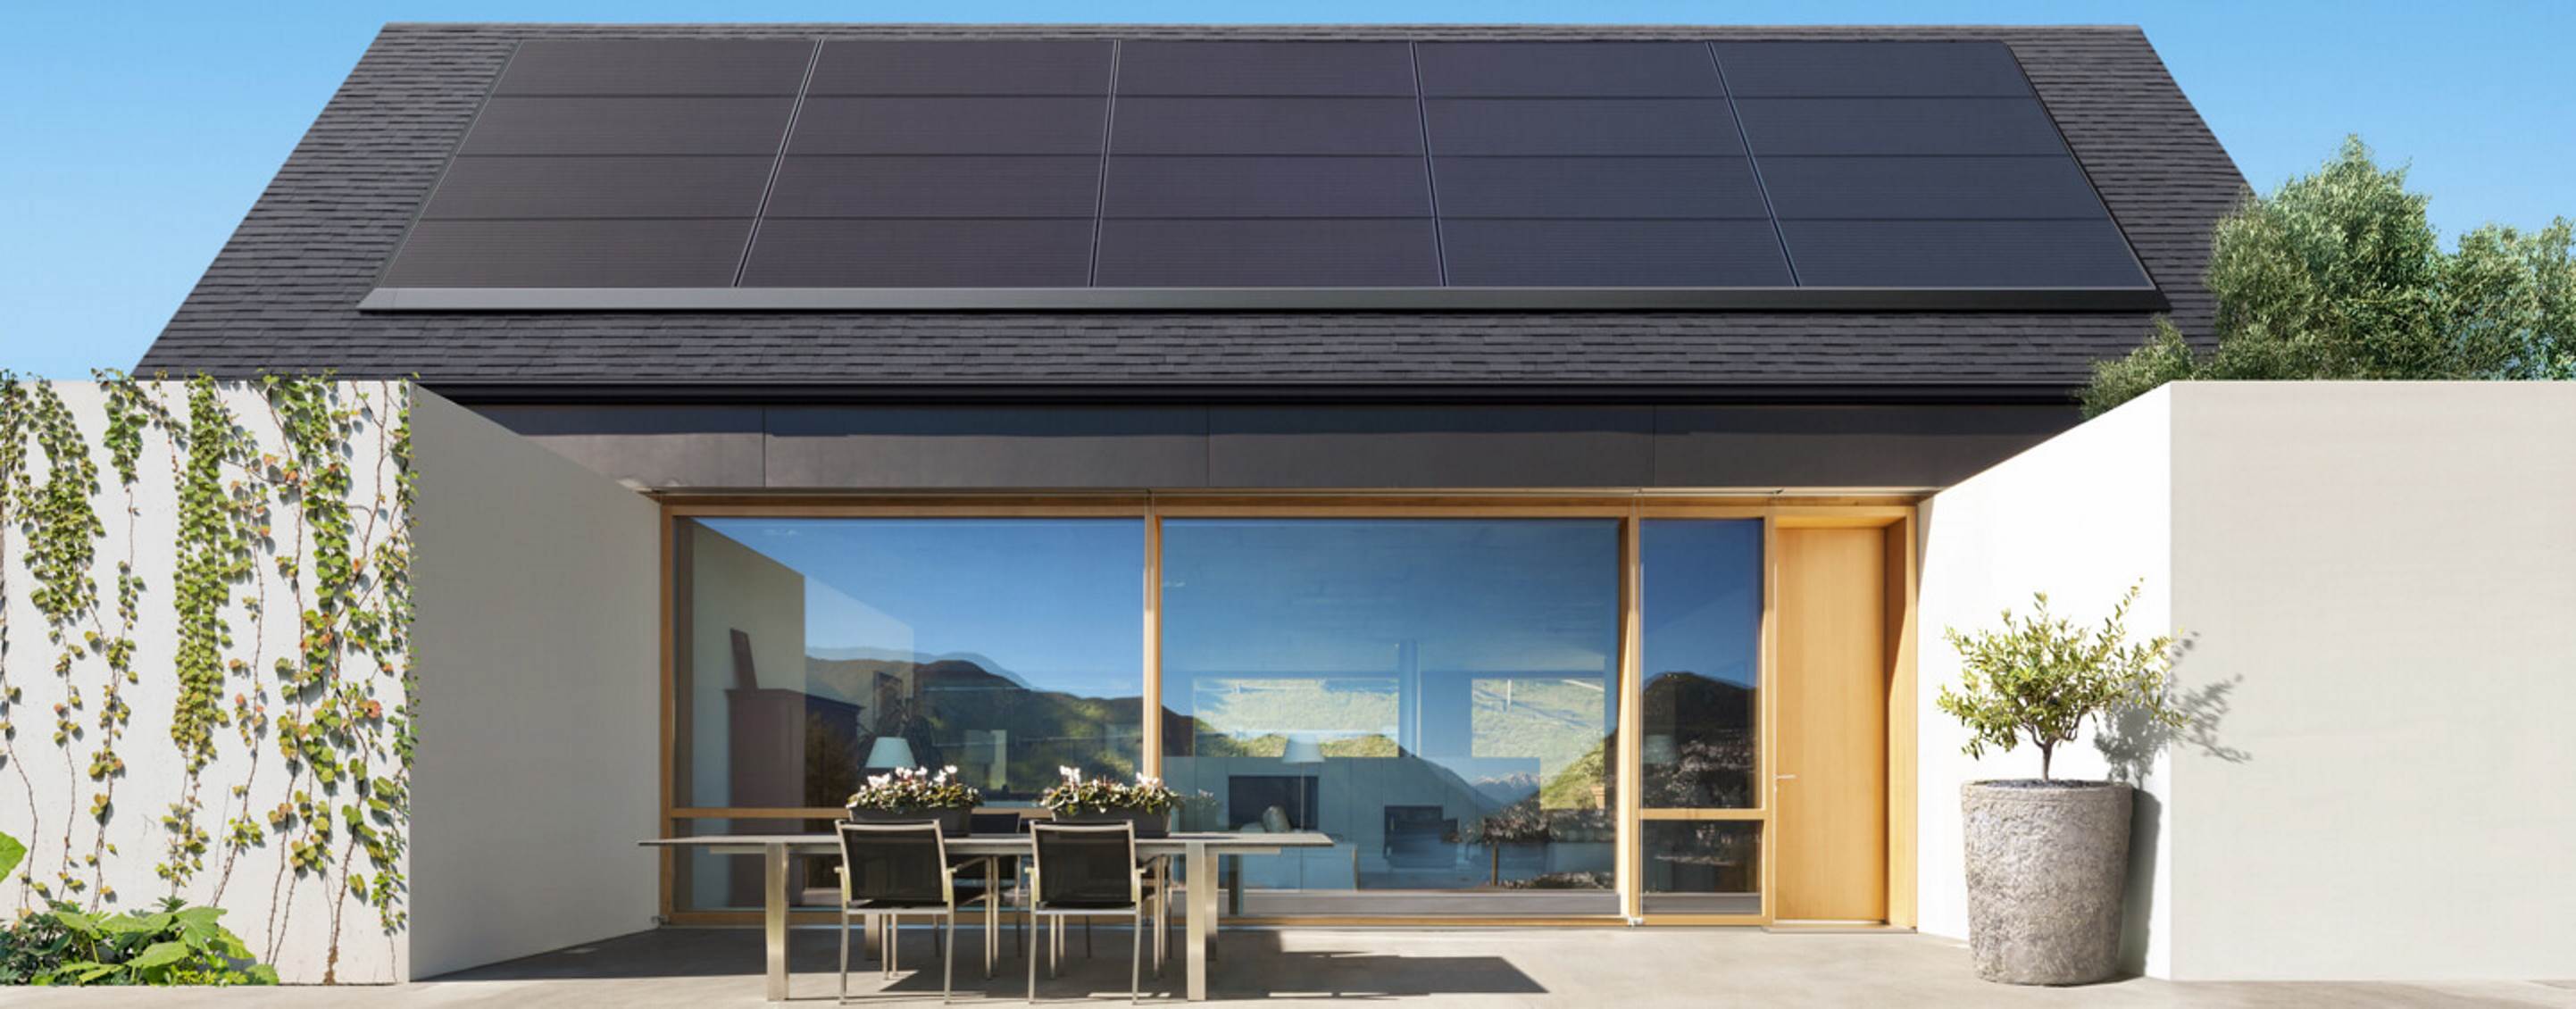 the-company-wants-you-to-harness-the-power-of-the-sun-solar-roof